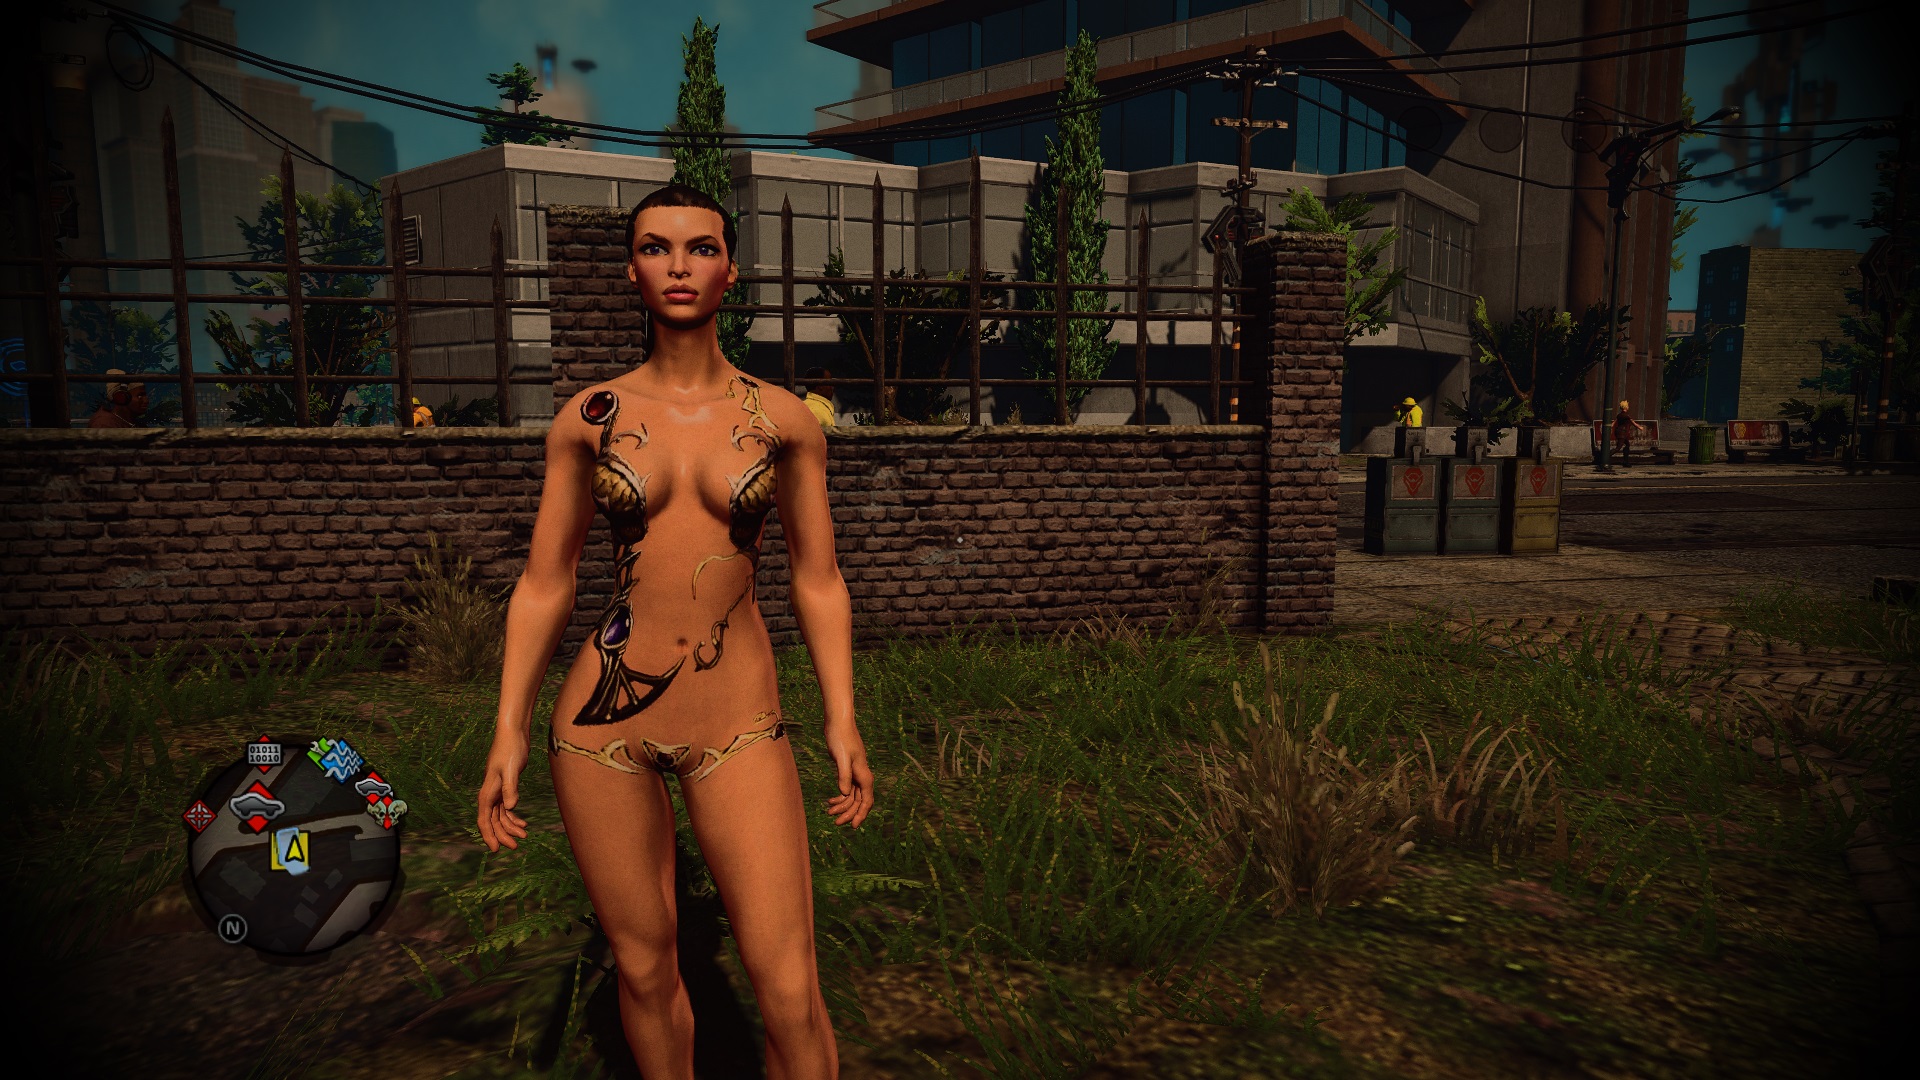 dolly abaza recommends Saints Row 4 Nudity Mod